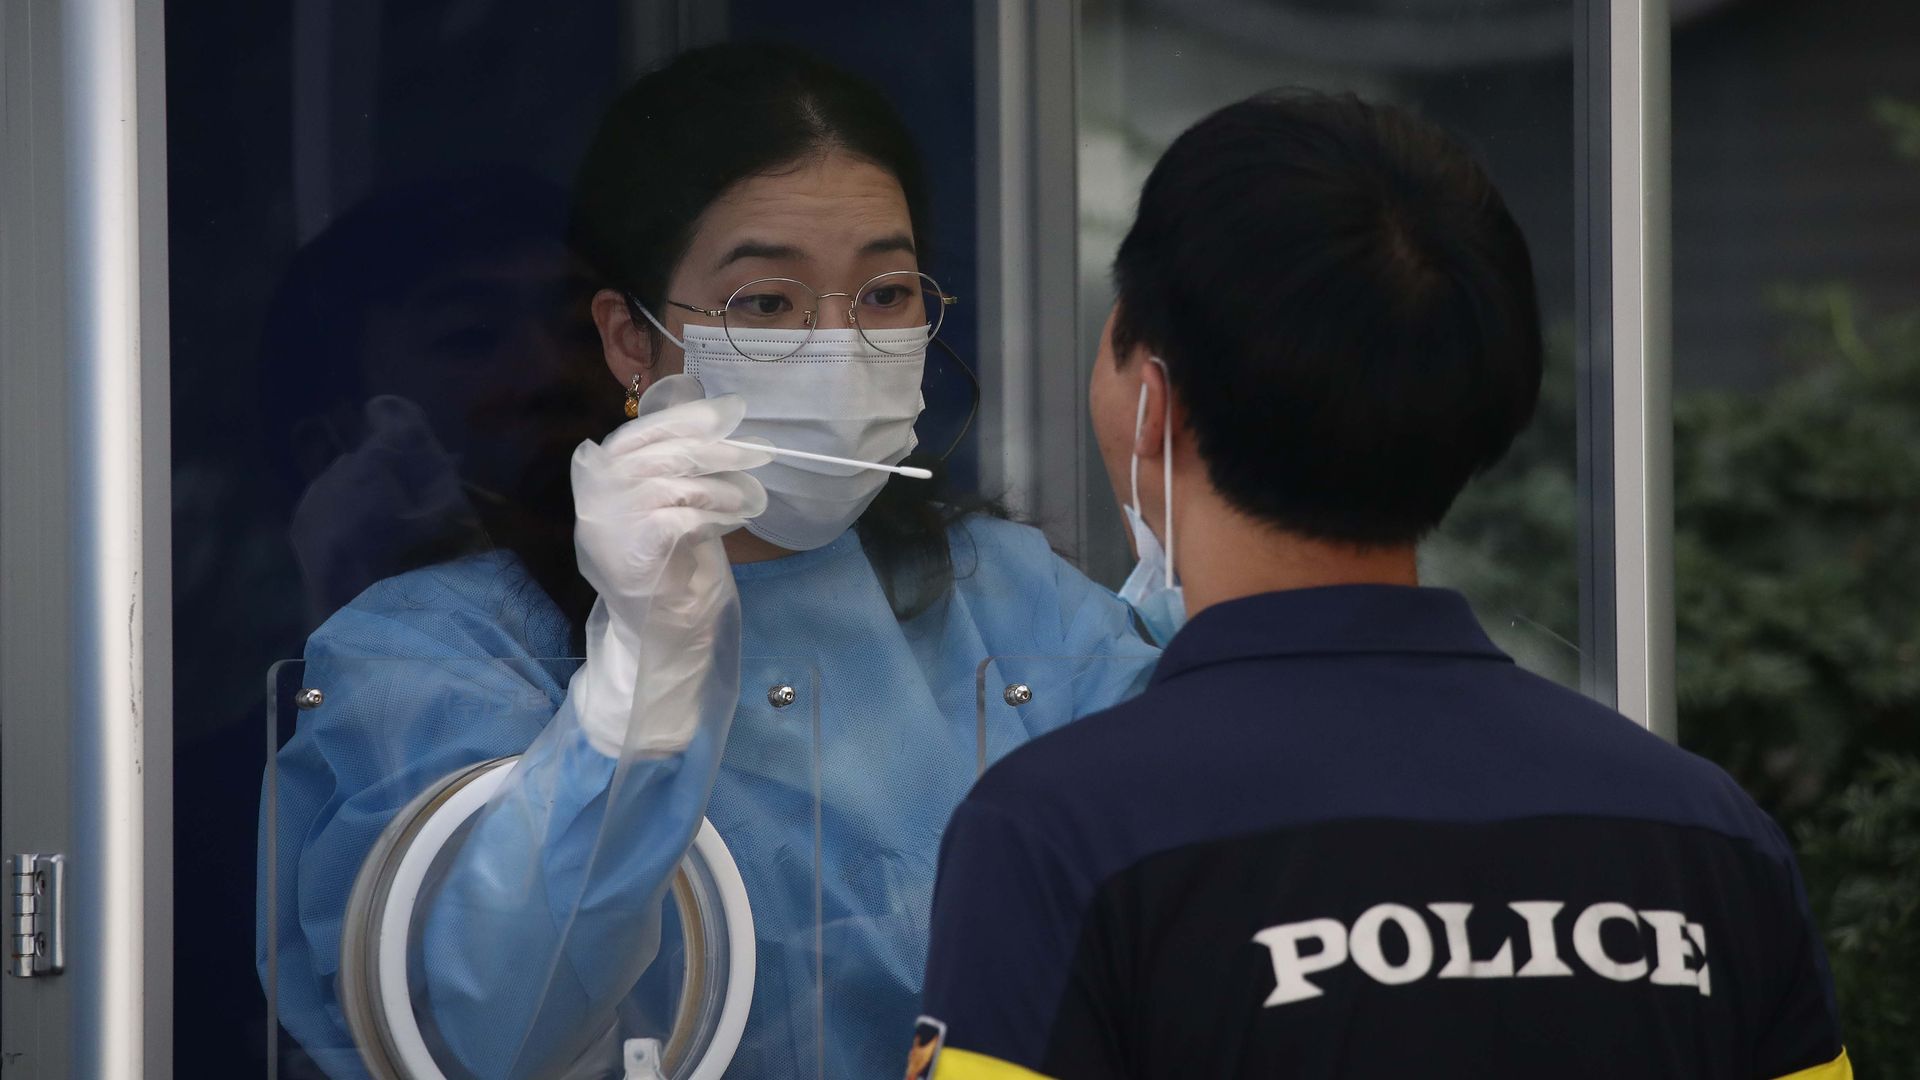 A coronavirus test being done in Seoul. Photo: Chung Sung-Jun/Getty Images